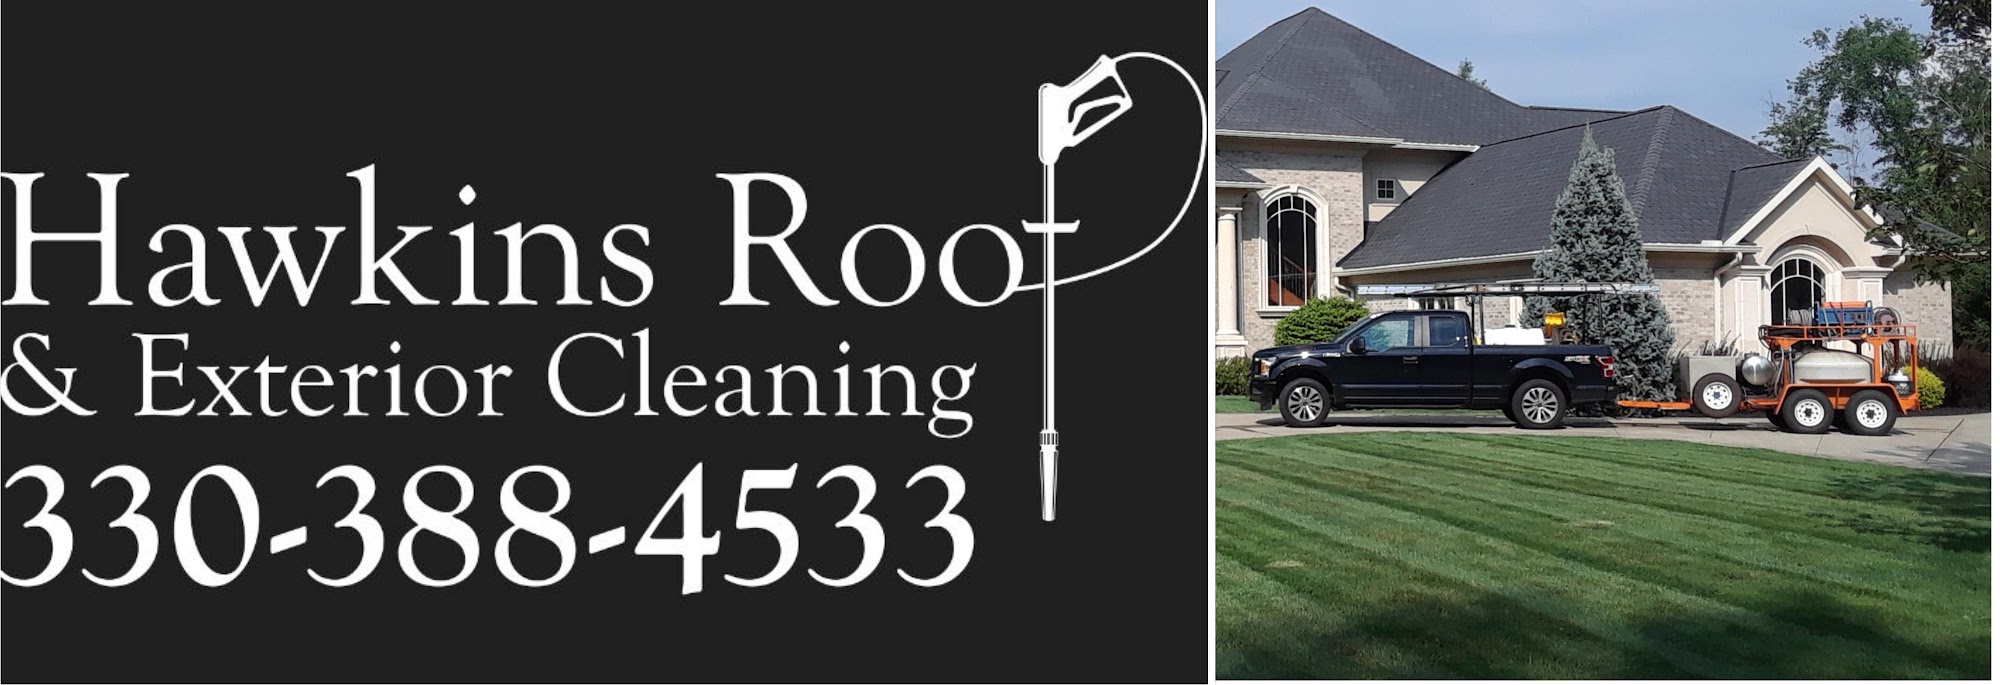 Hawkins Roof & Exterior Cleaning 234 Silver Valley Blvd, Munroe Falls Ohio 44262